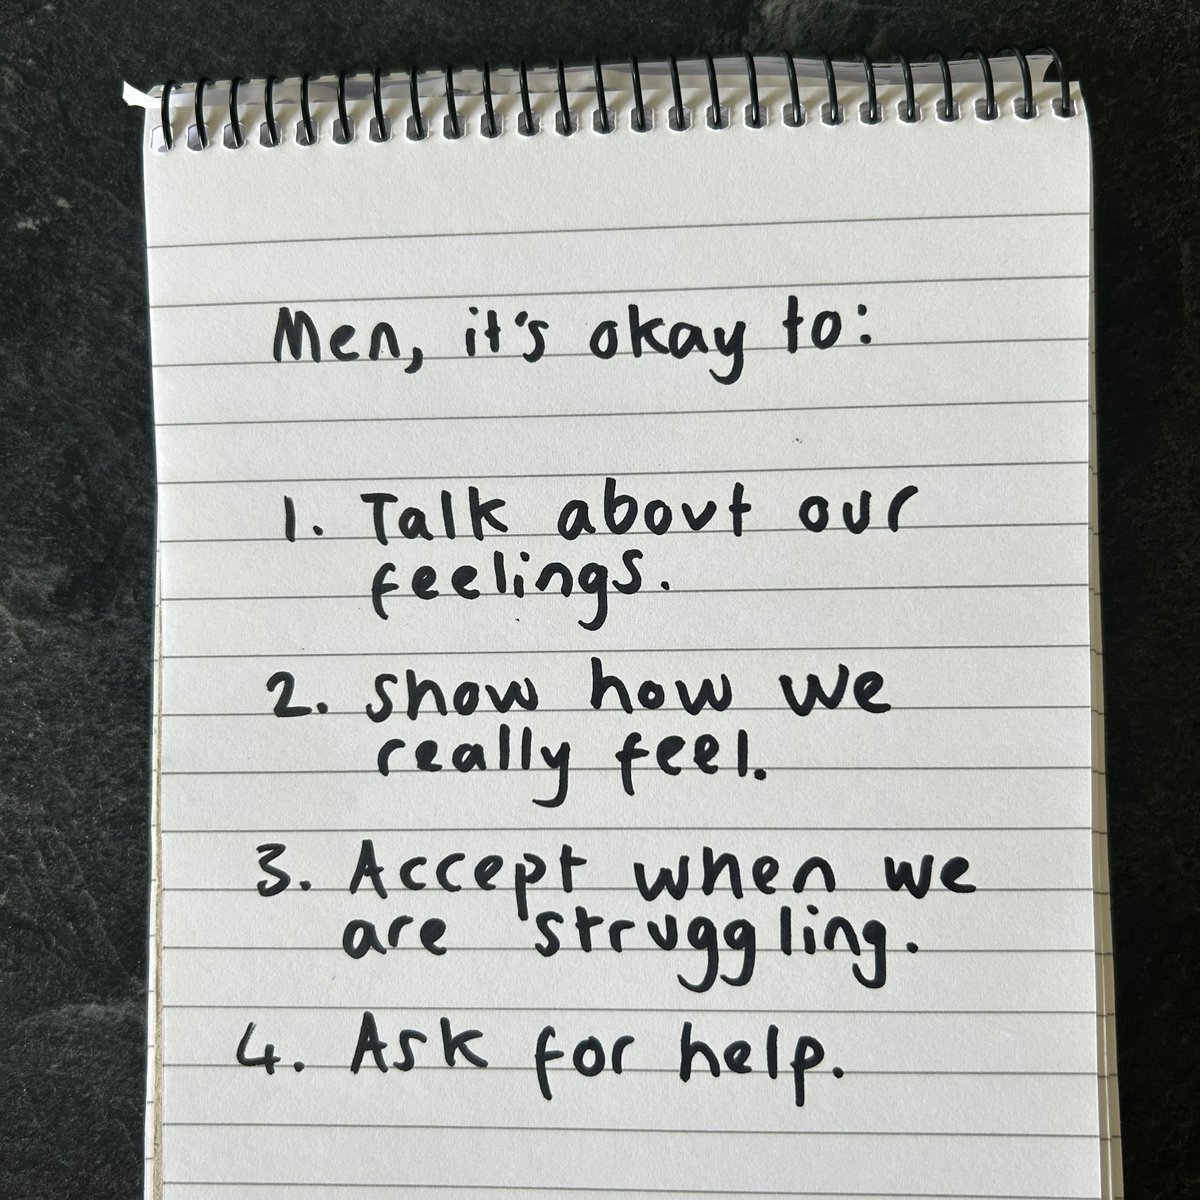 You do not need to stay strong. It’s okay if you’re struggling. This #WorldSuicidePreventionDay, let’s continue to have these important conversations about men’s mental health. There is still a massive stigma. We have to change it.